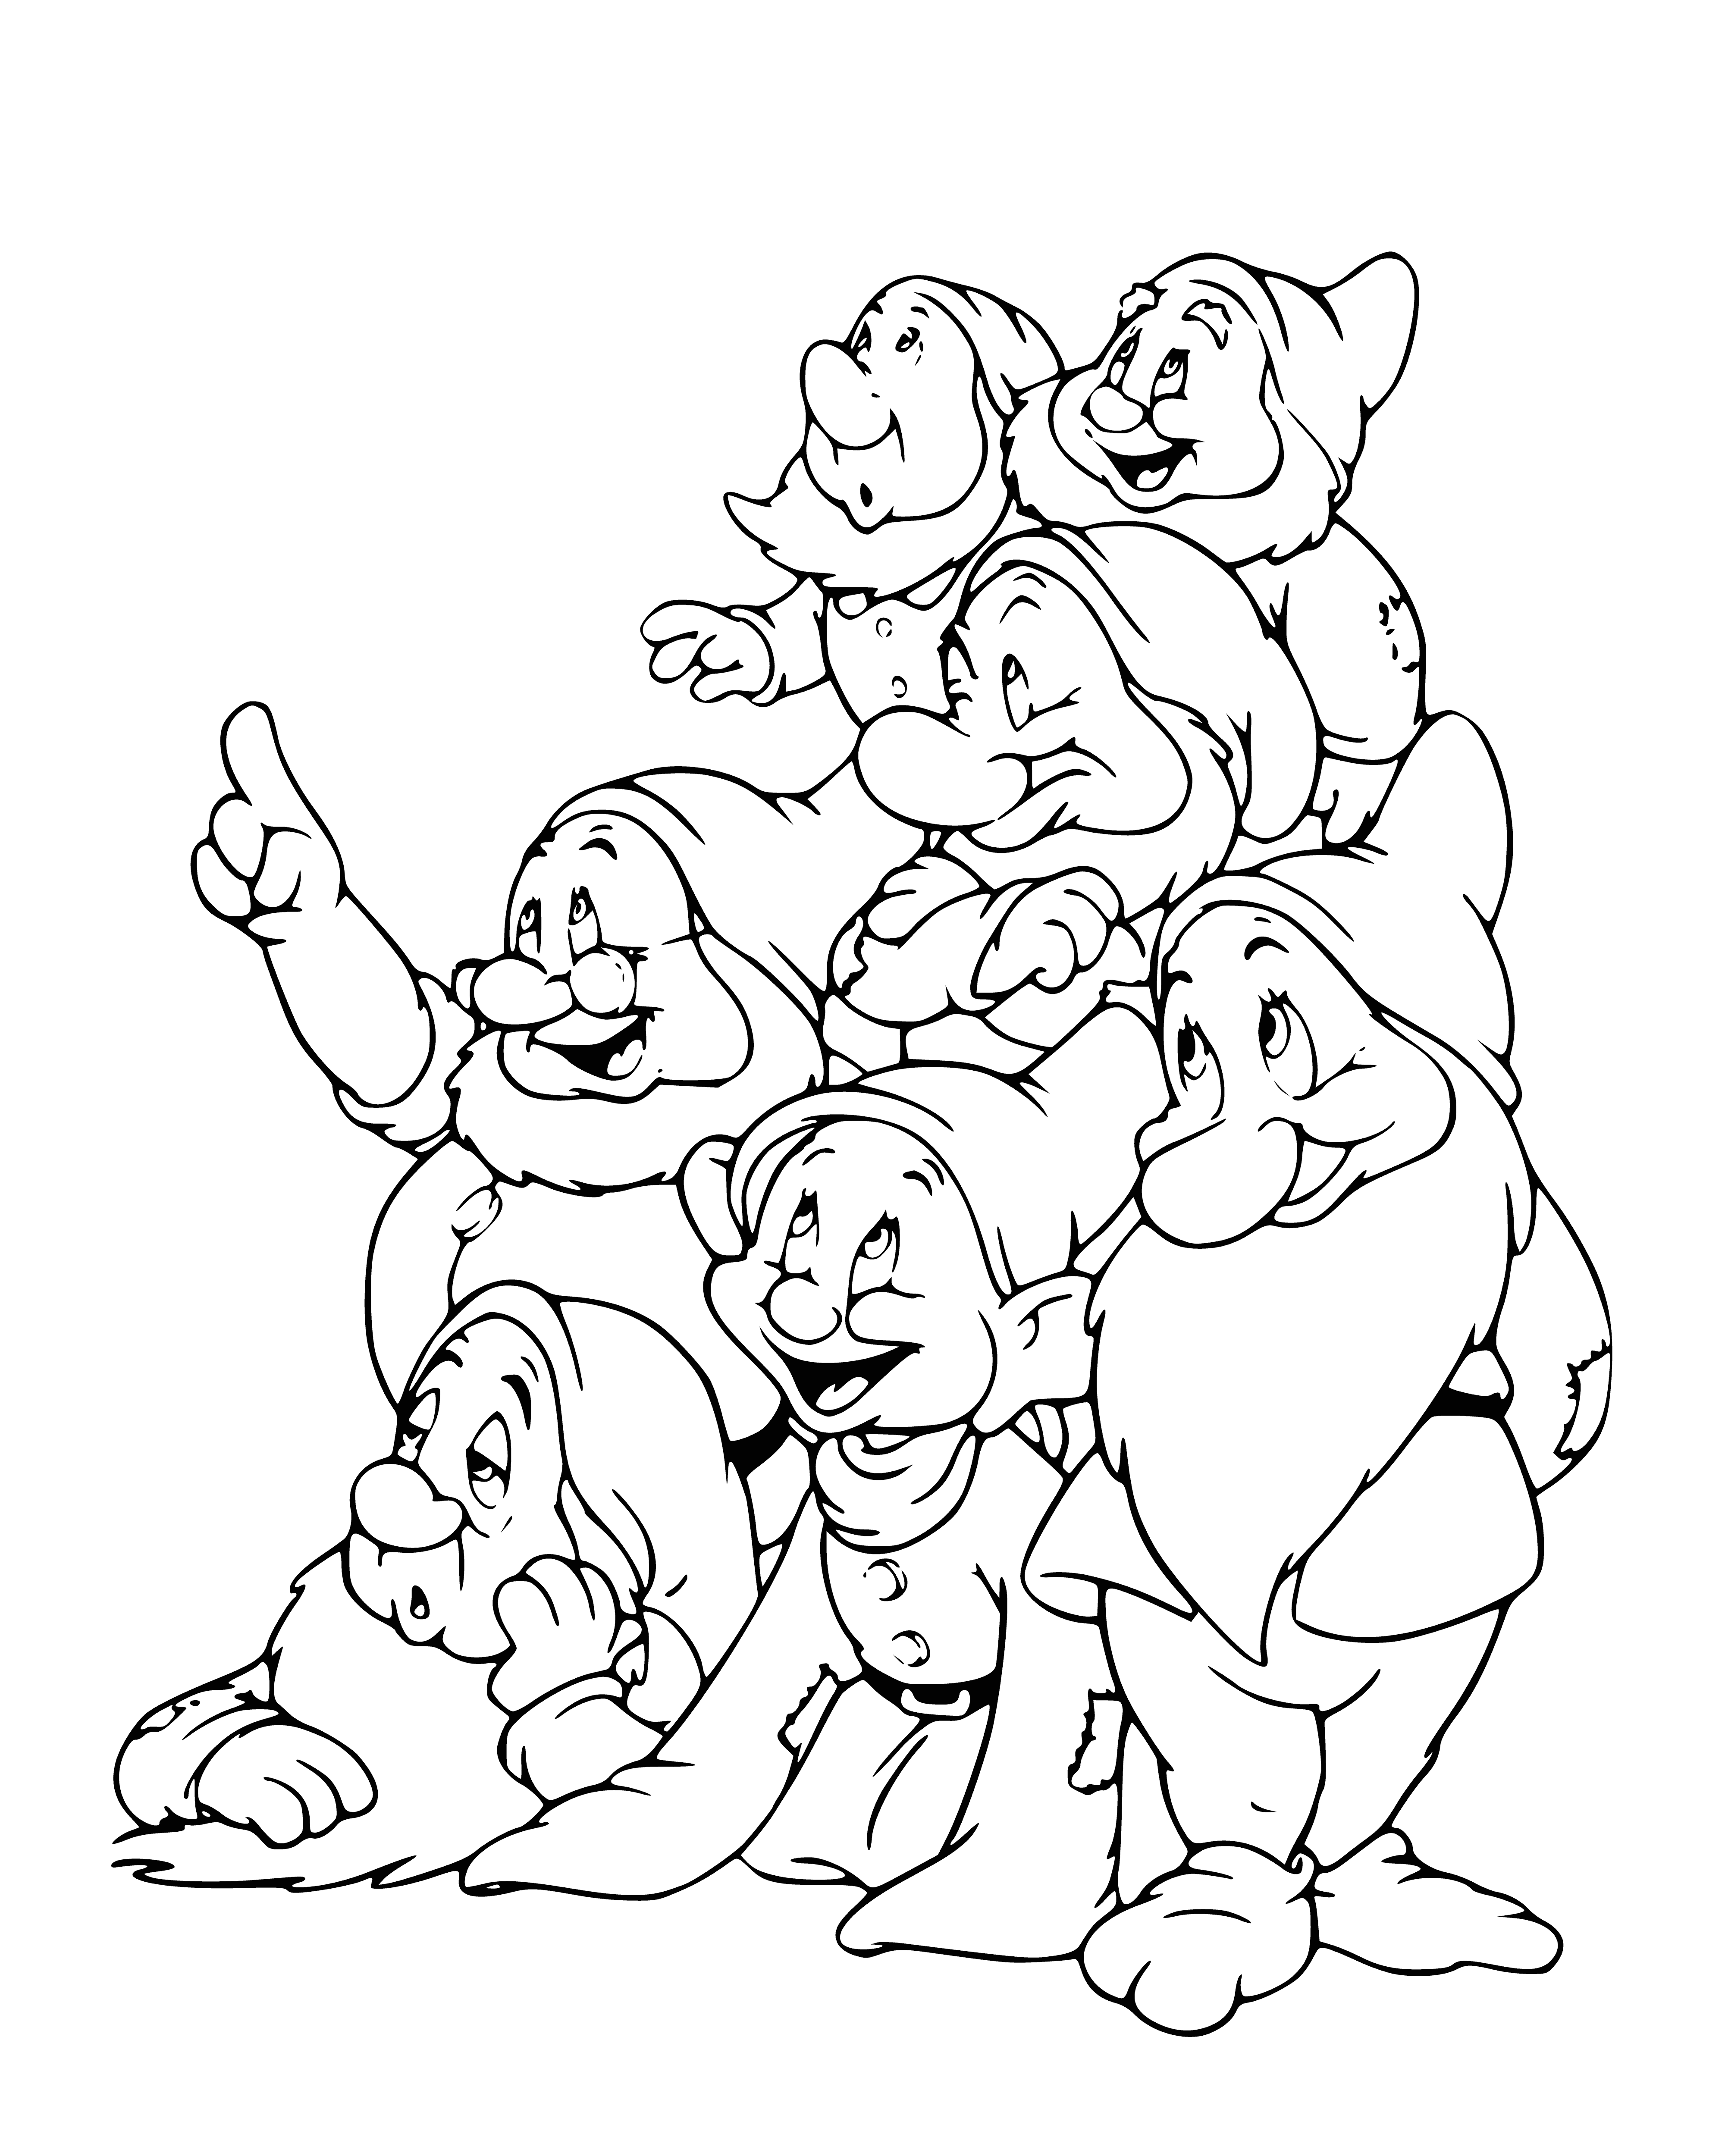 coloring page: Seven figures with large noses, beards, and hats holding axes are looking up in a line.